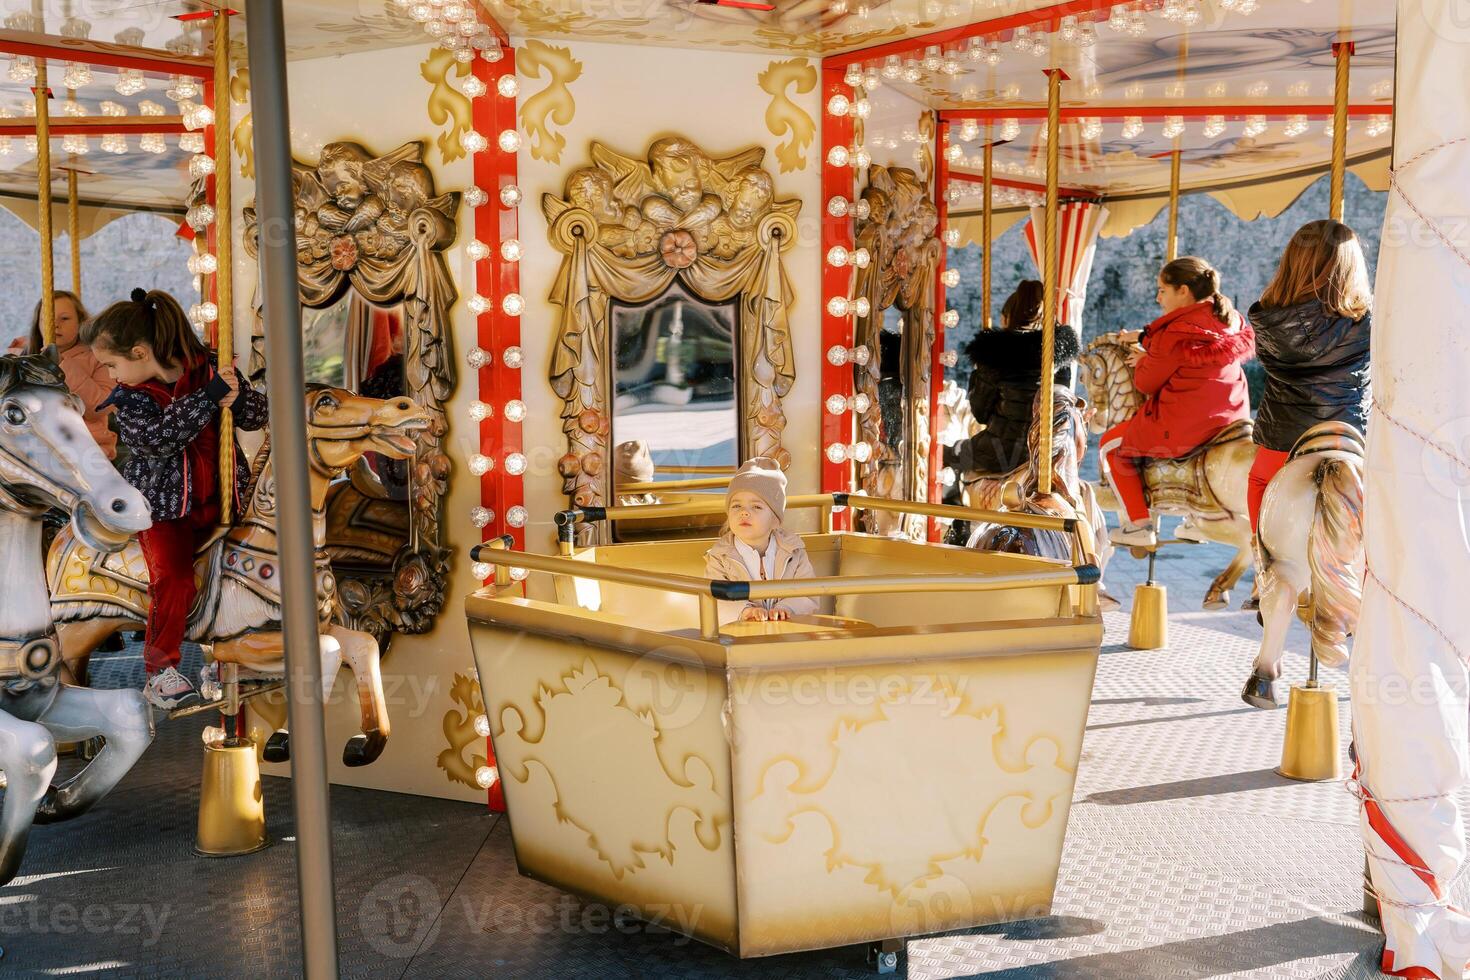 Little girl sits on a carousel seat next to children riding toy horses photo